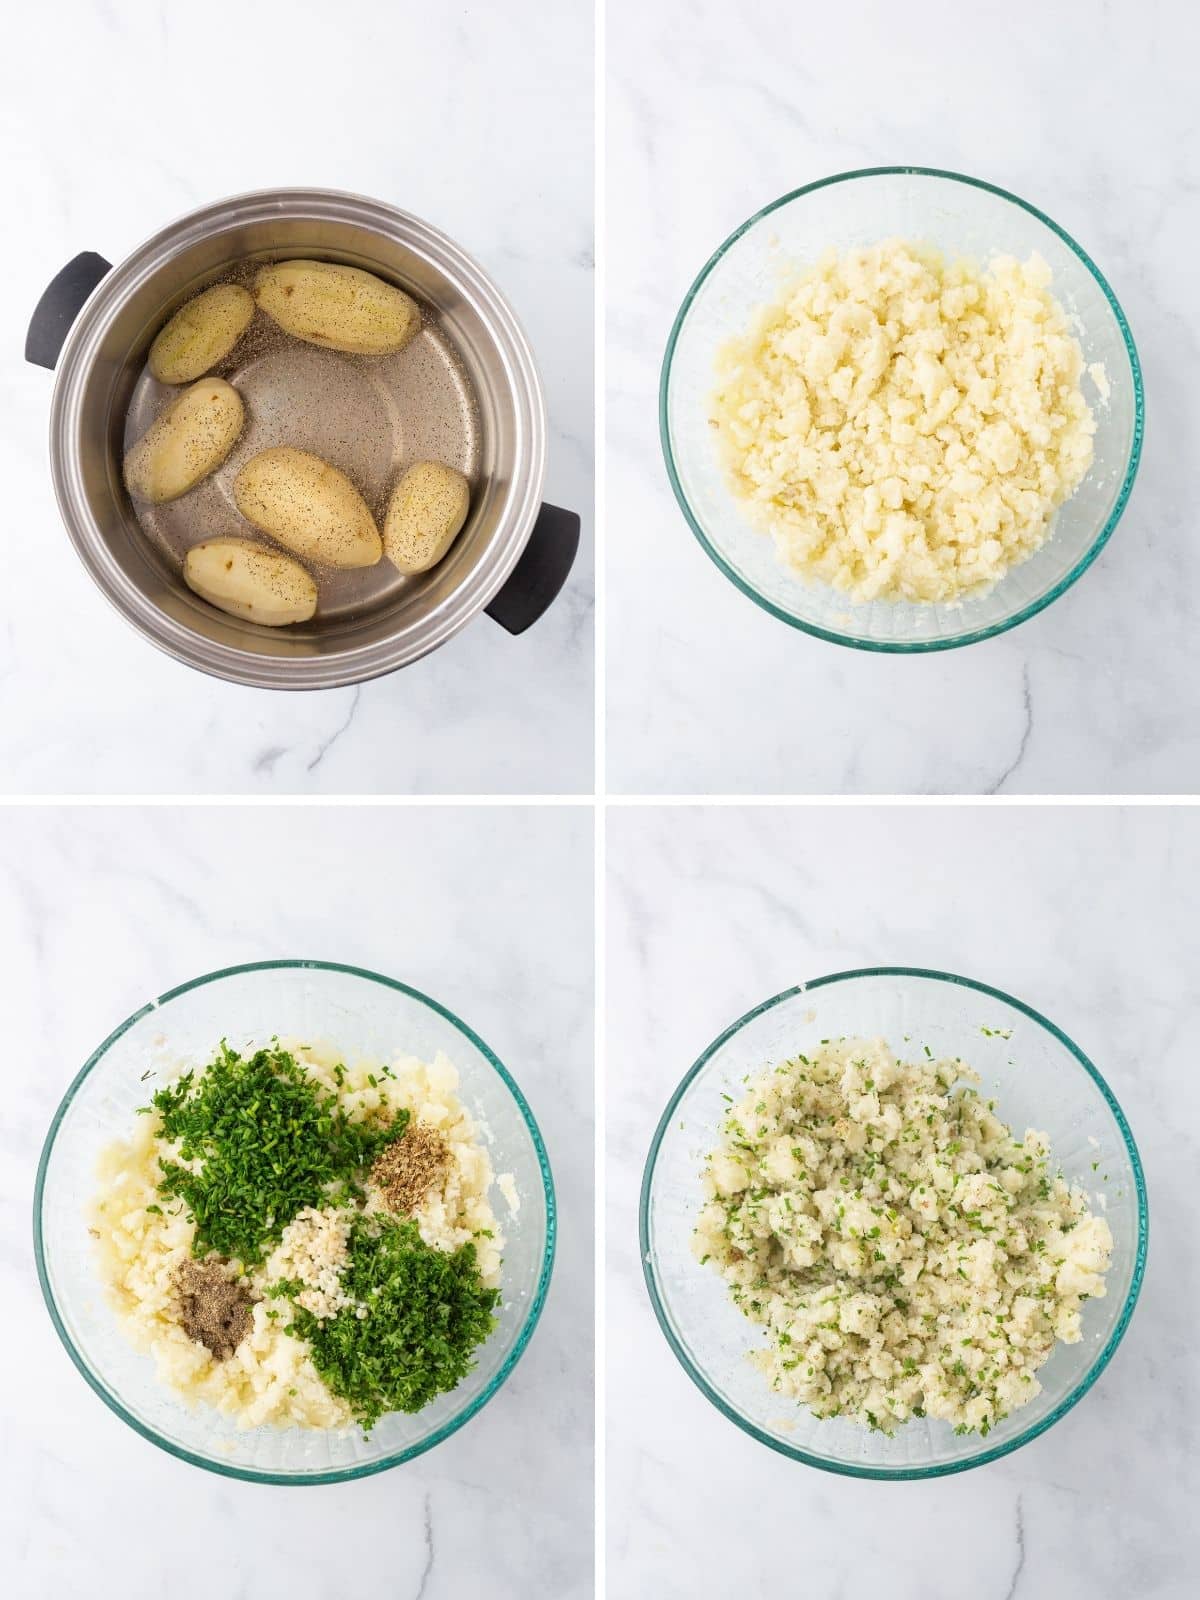 A collage of 4 images showing how to make potato balls.